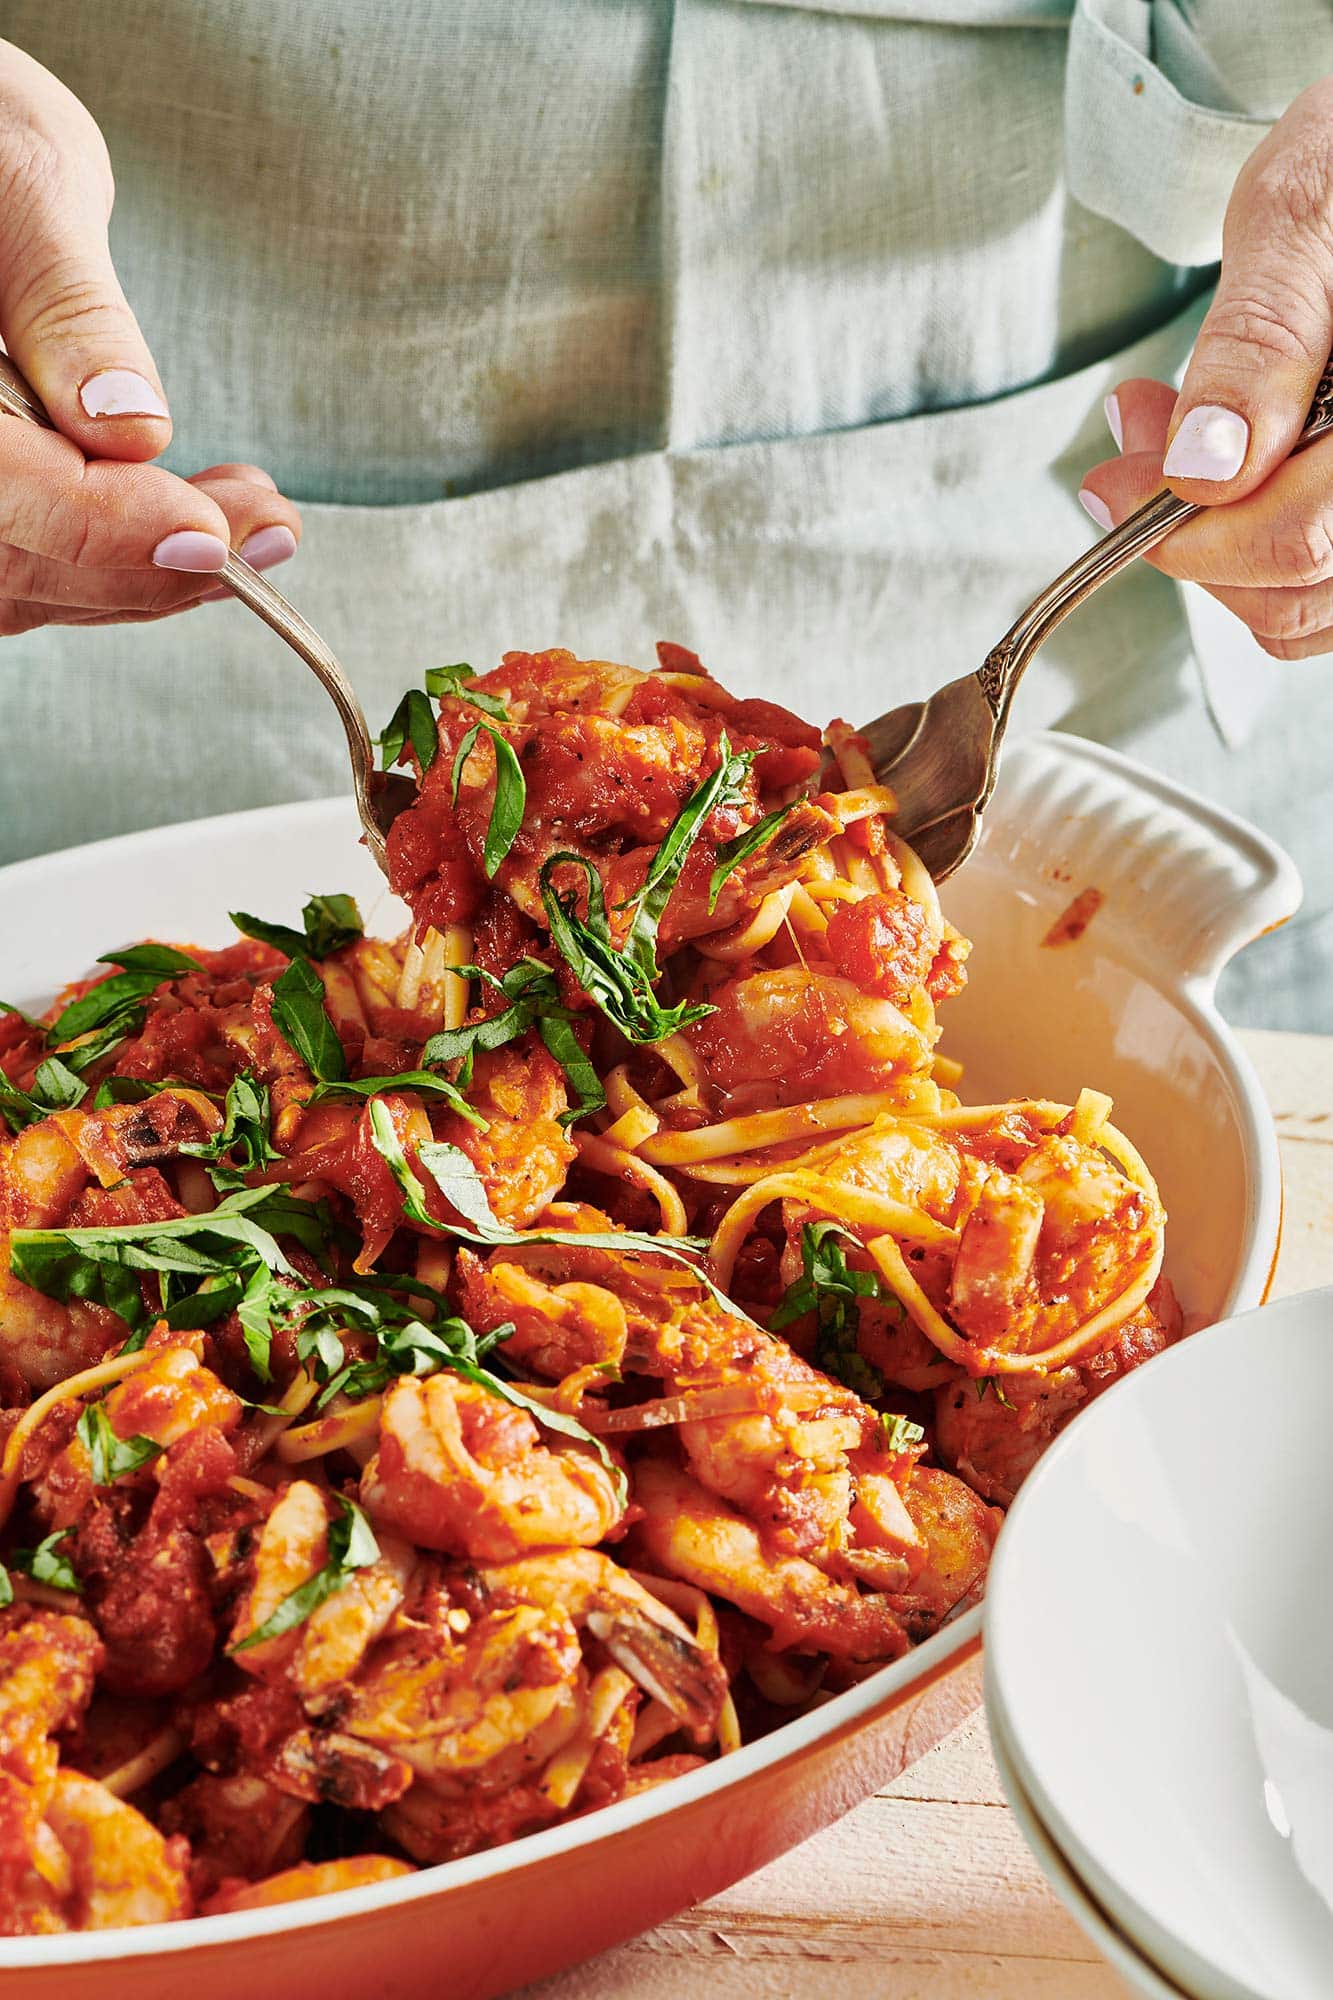 Woman serving up Shrimp Fra Diavolo with Linguine from white serving dish.